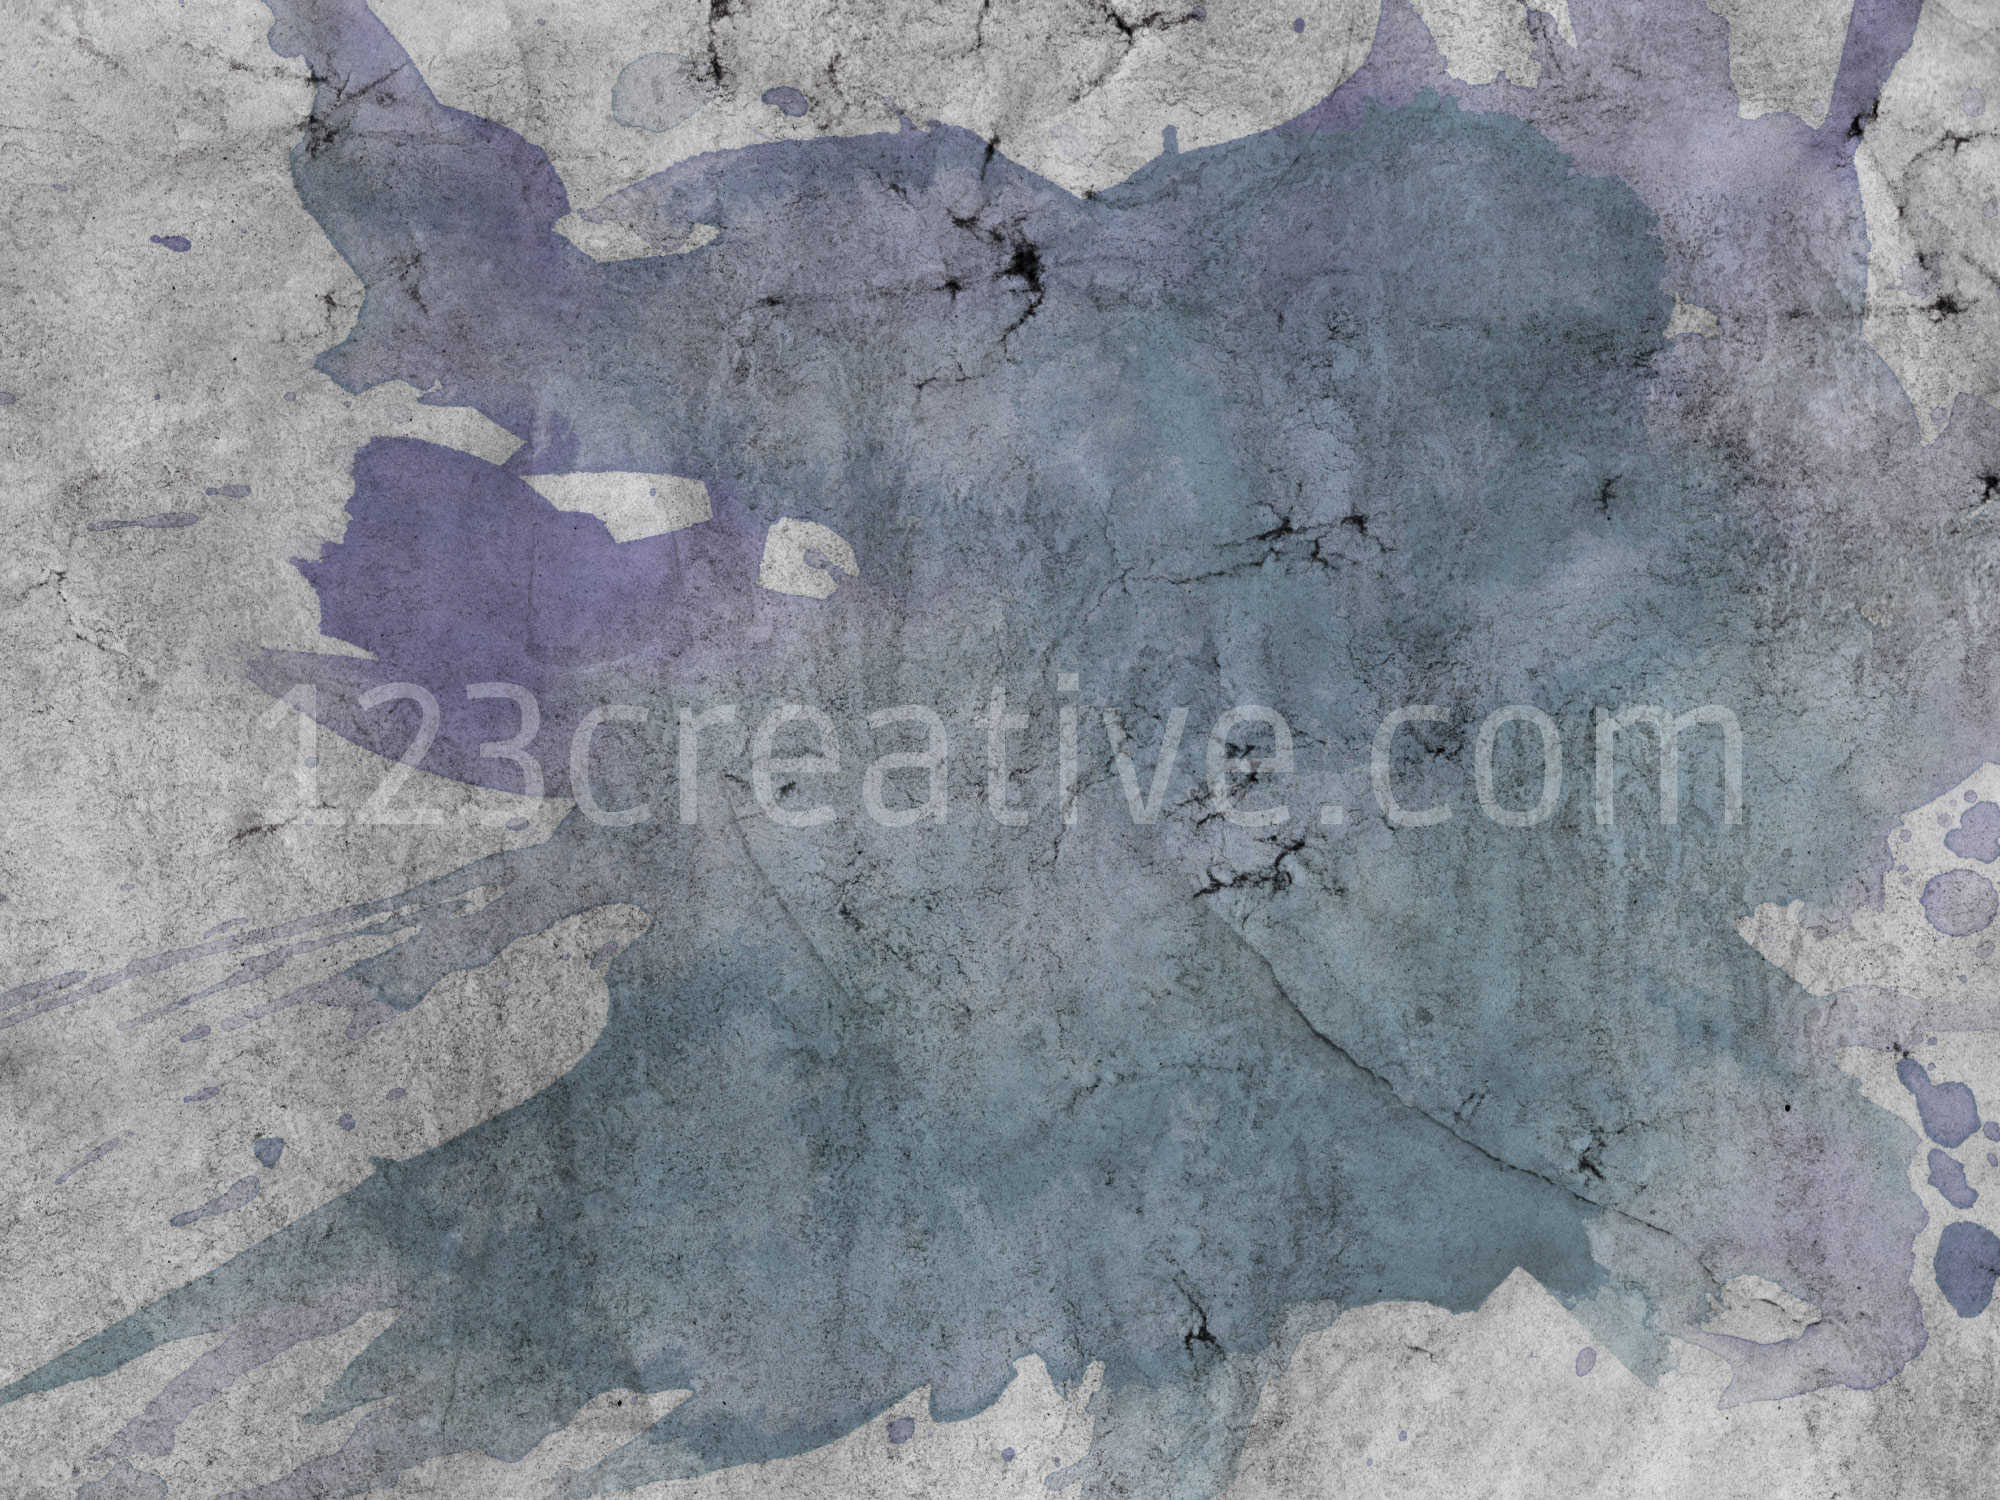 Grunge wall textures pack - wall grunge backgrounds, wall textures ...